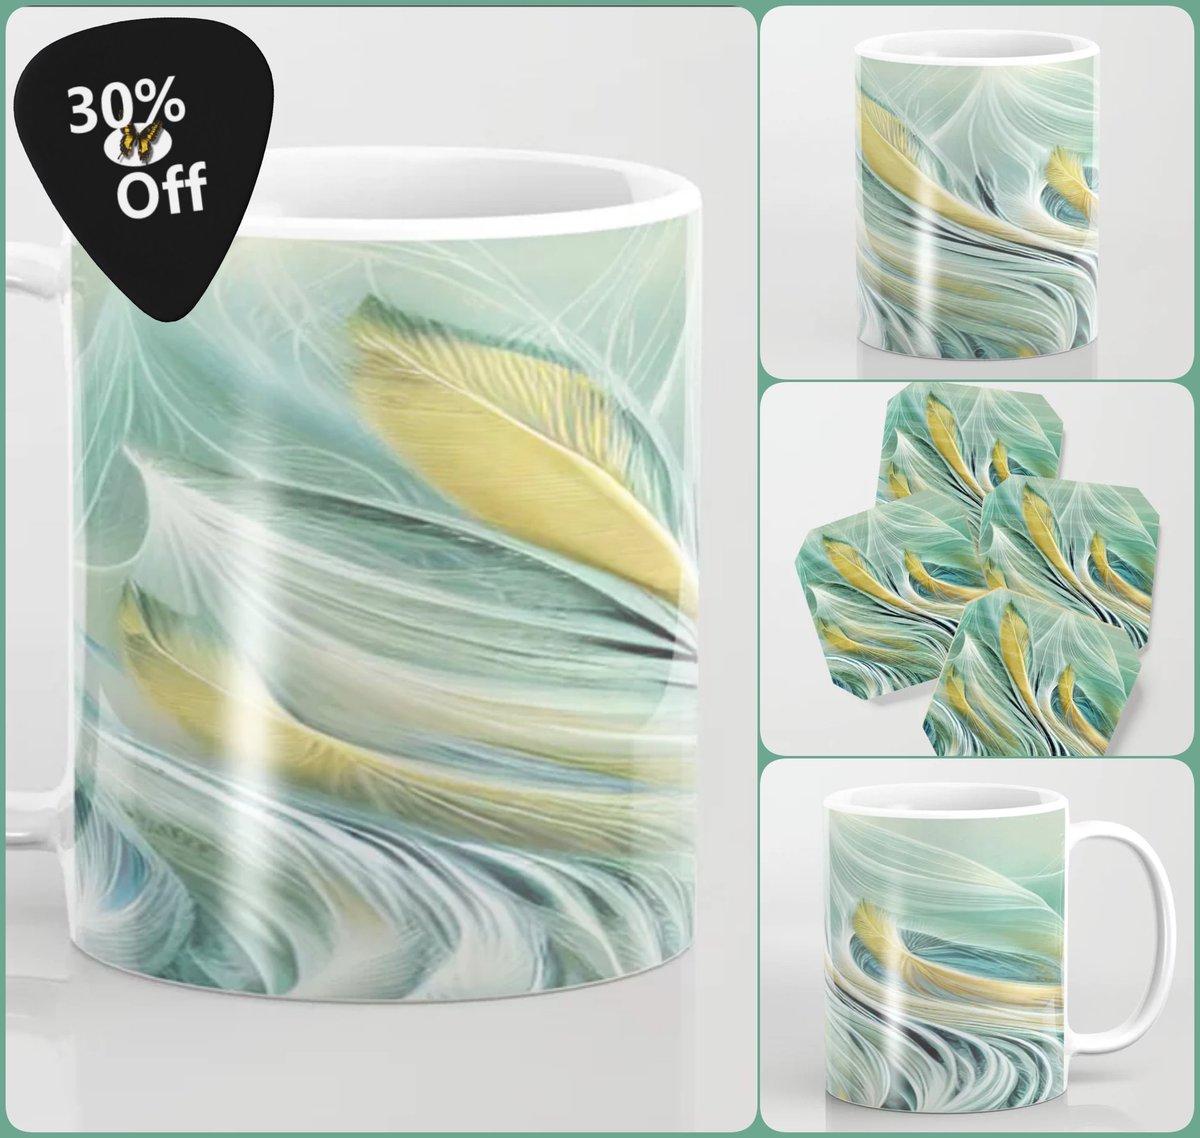 *SALE 30% Off* Paradise of Feathers Coffee Mug~by Art_Falaxy ~Art Exquisite!~ #coasters #gifts #trays #mugs #coffee #society6 #travel #artfalaxy #art #accents #modern #trendy #wine #water #placemats #tablecloths #runners #green #yellow #white #black society6.com/product/paradi…